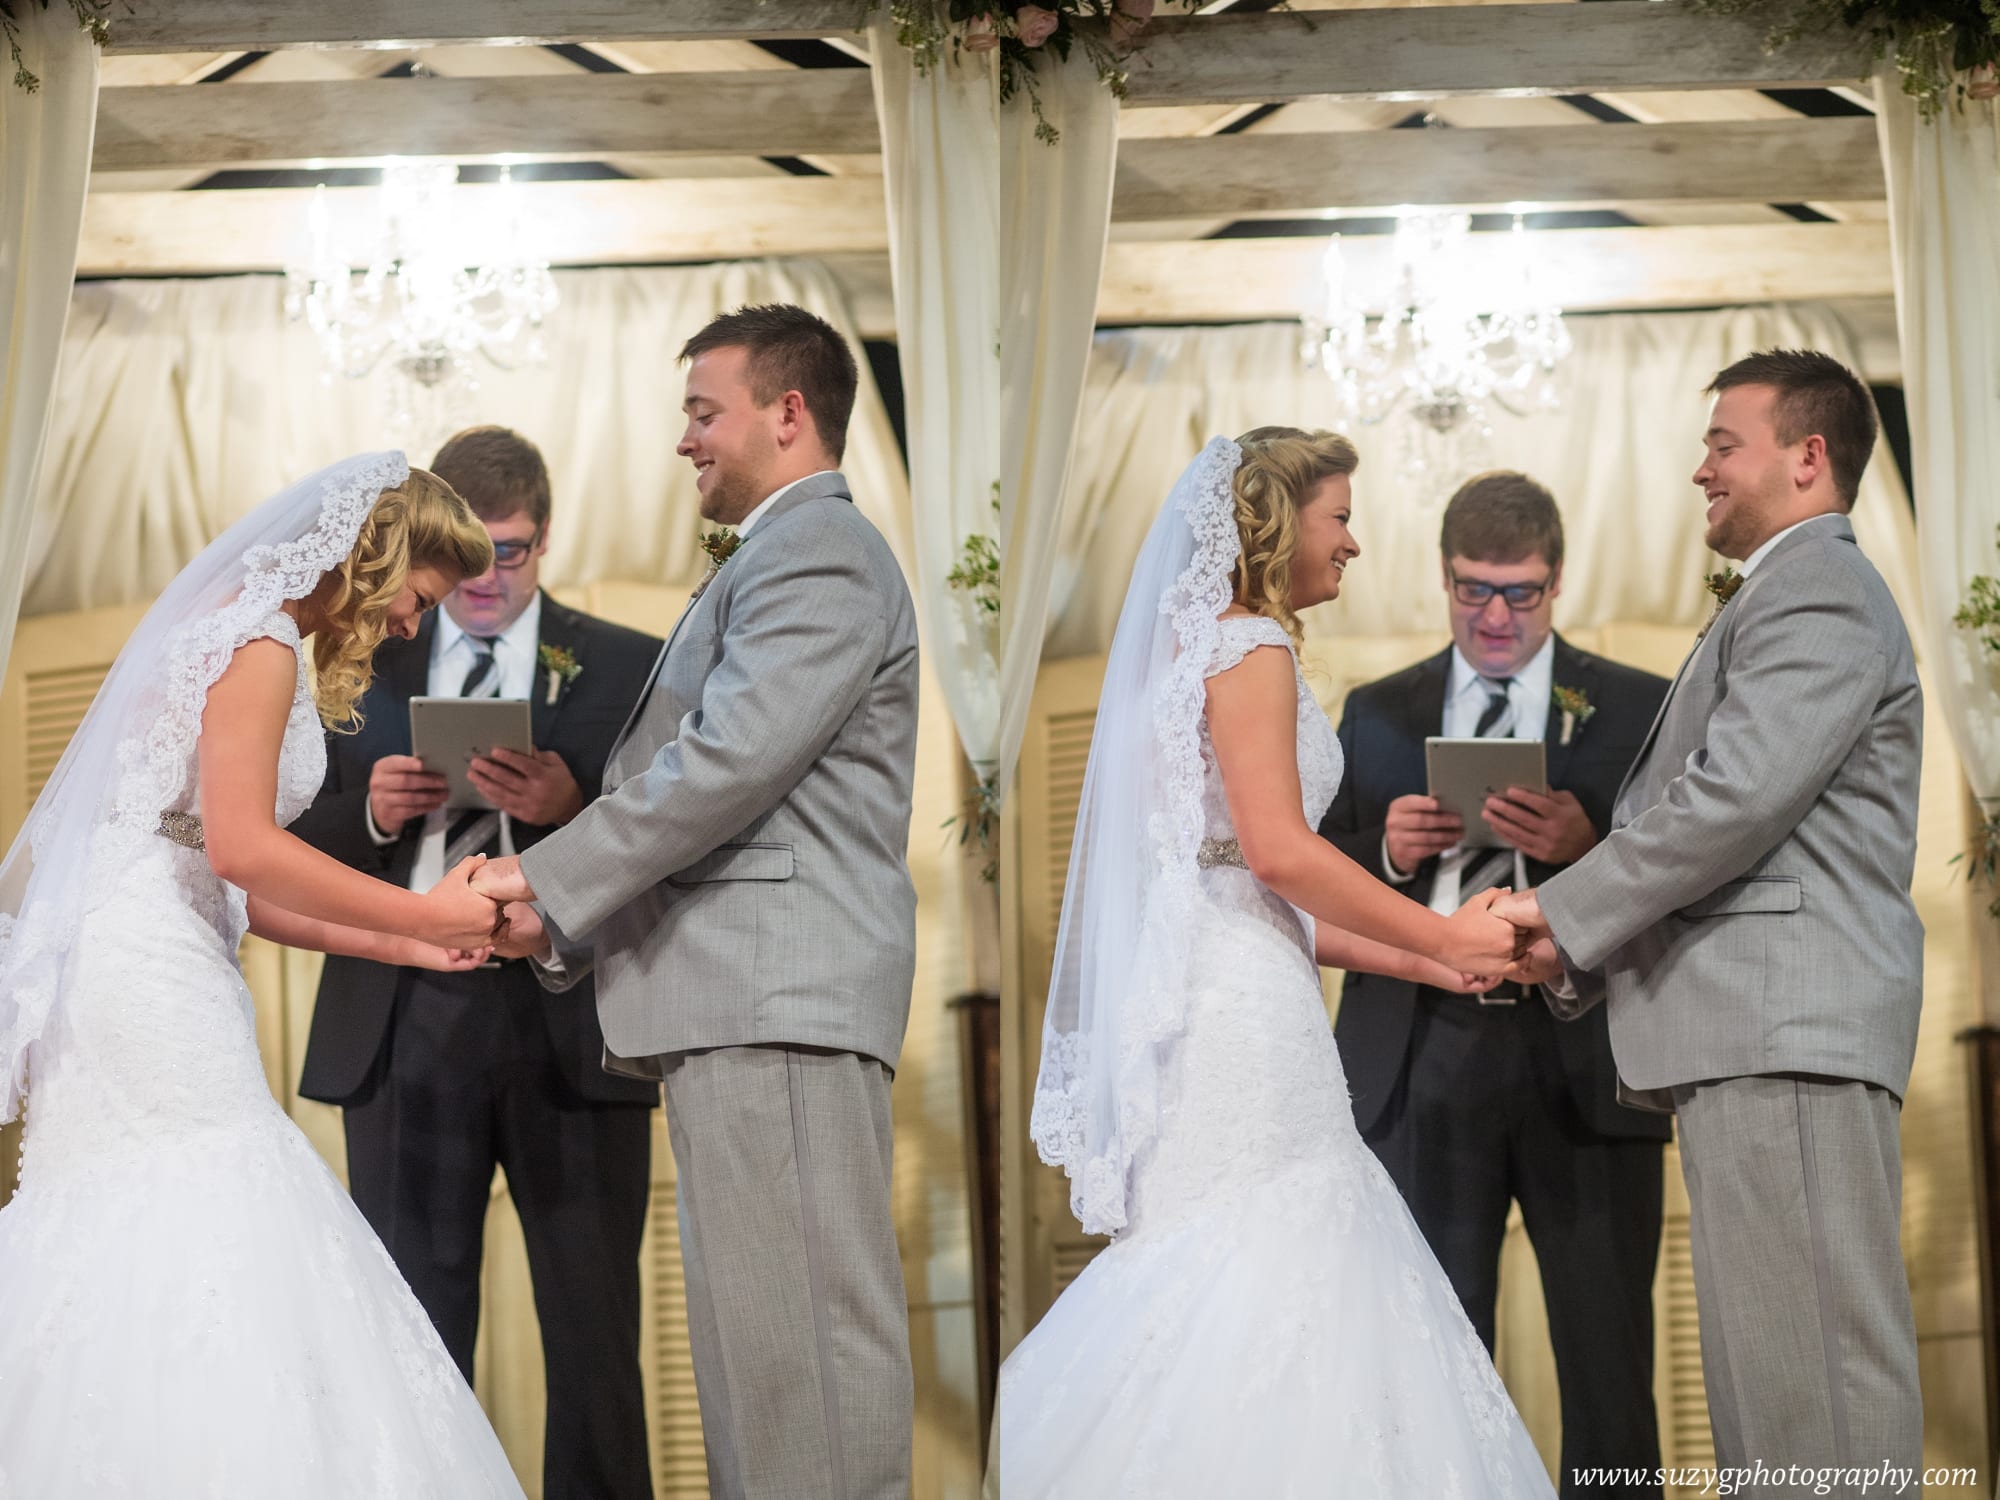 vows by victoria-lake charles-wedding-photography-suzy g-photography-suzygphotography_0049